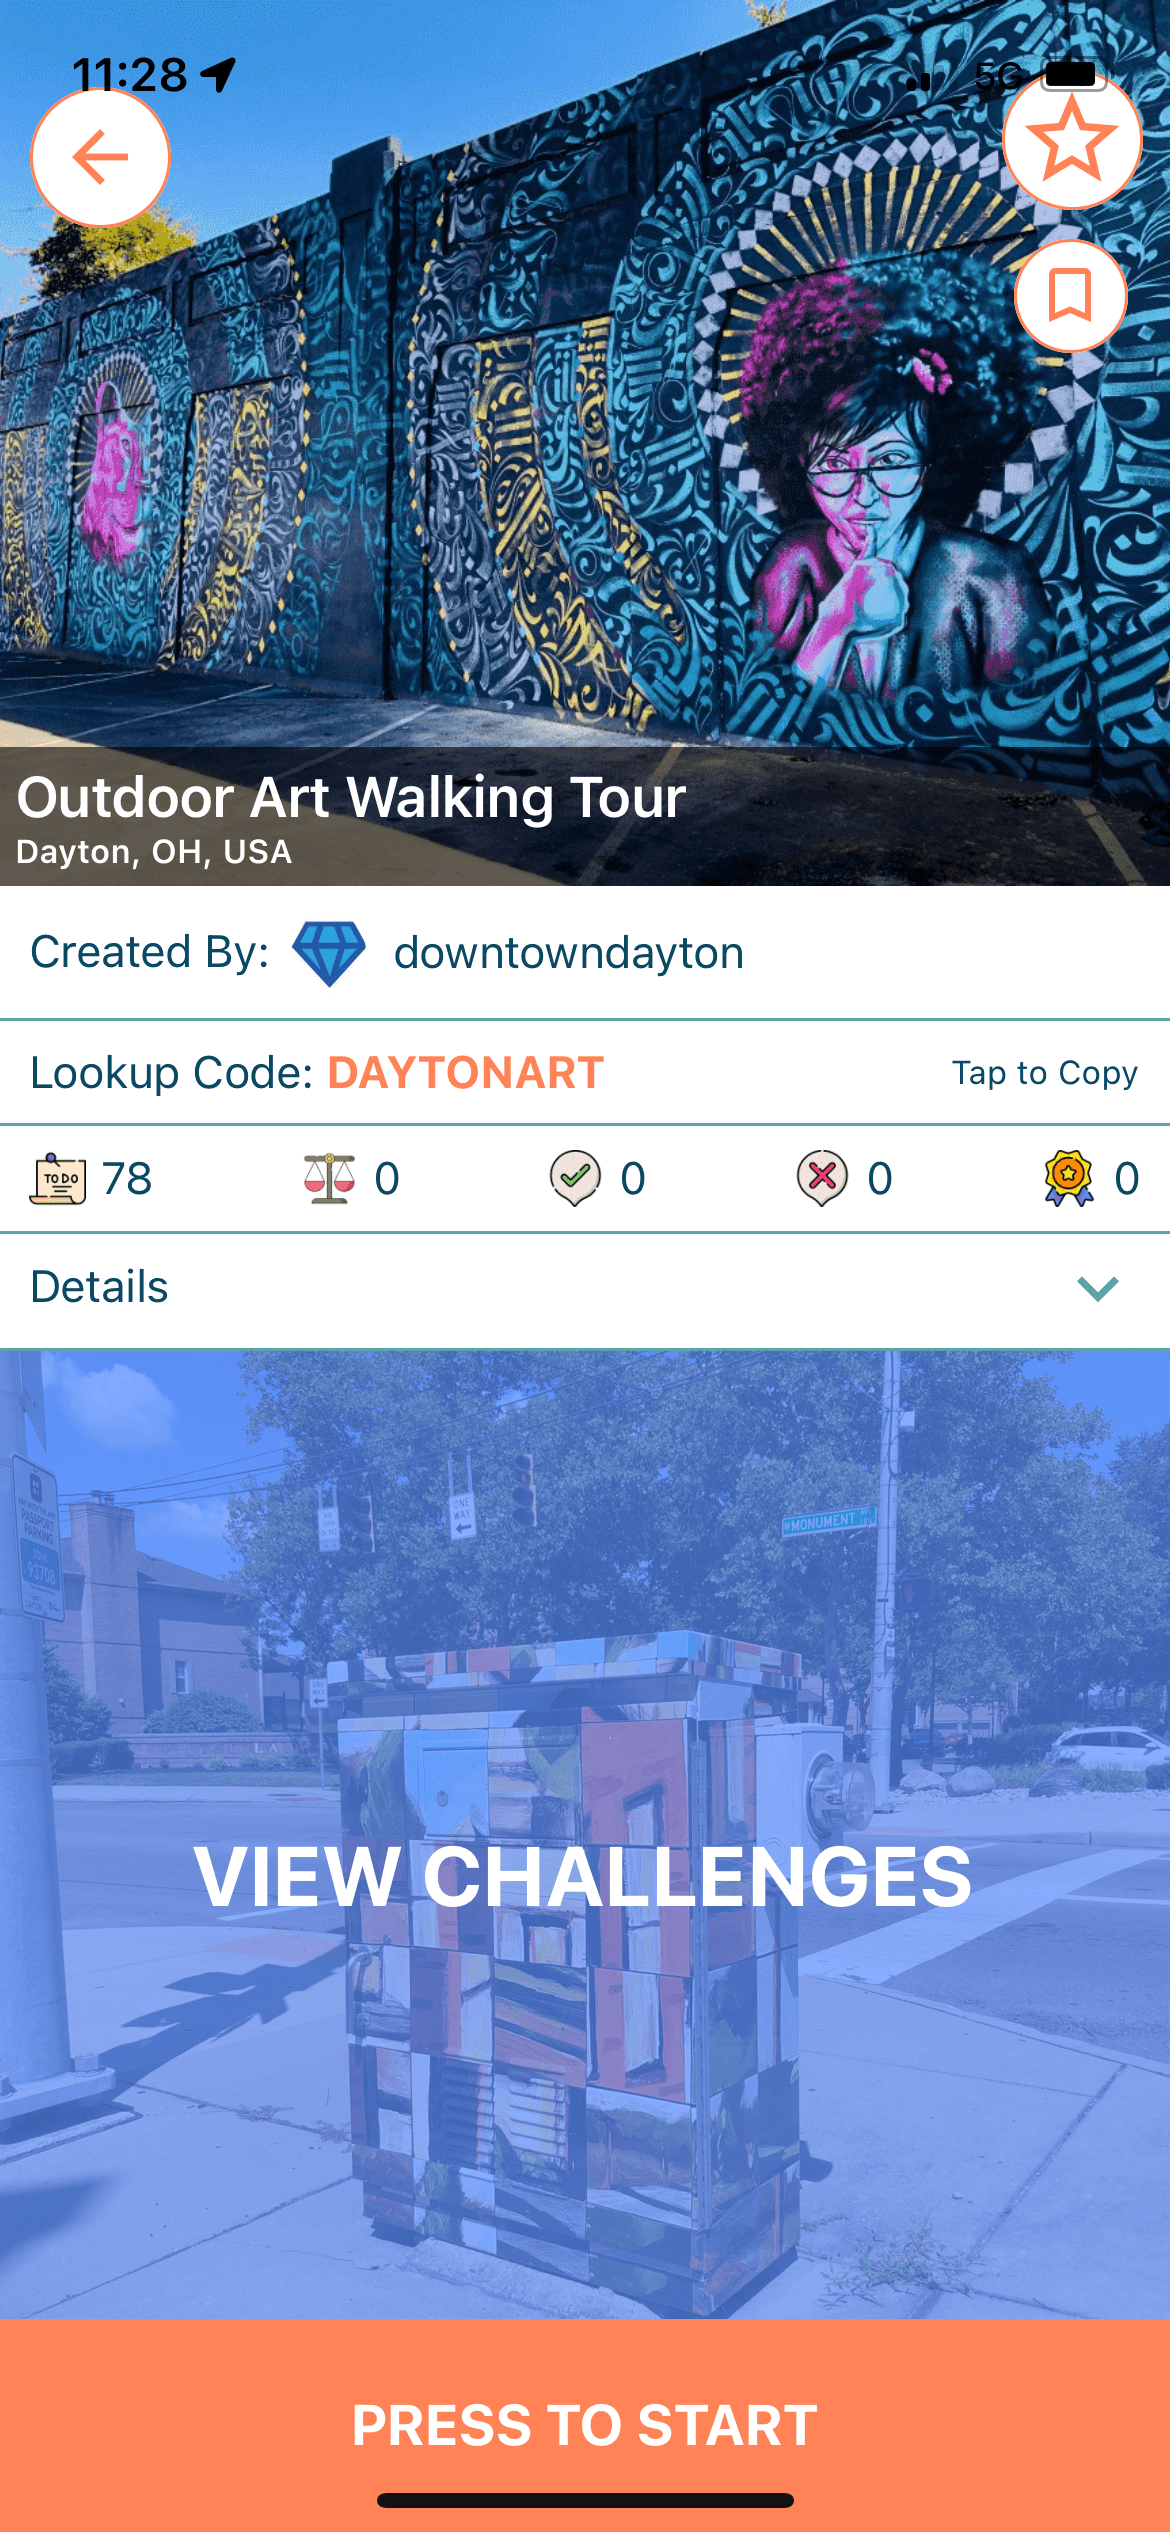 Walking Tour Event Page